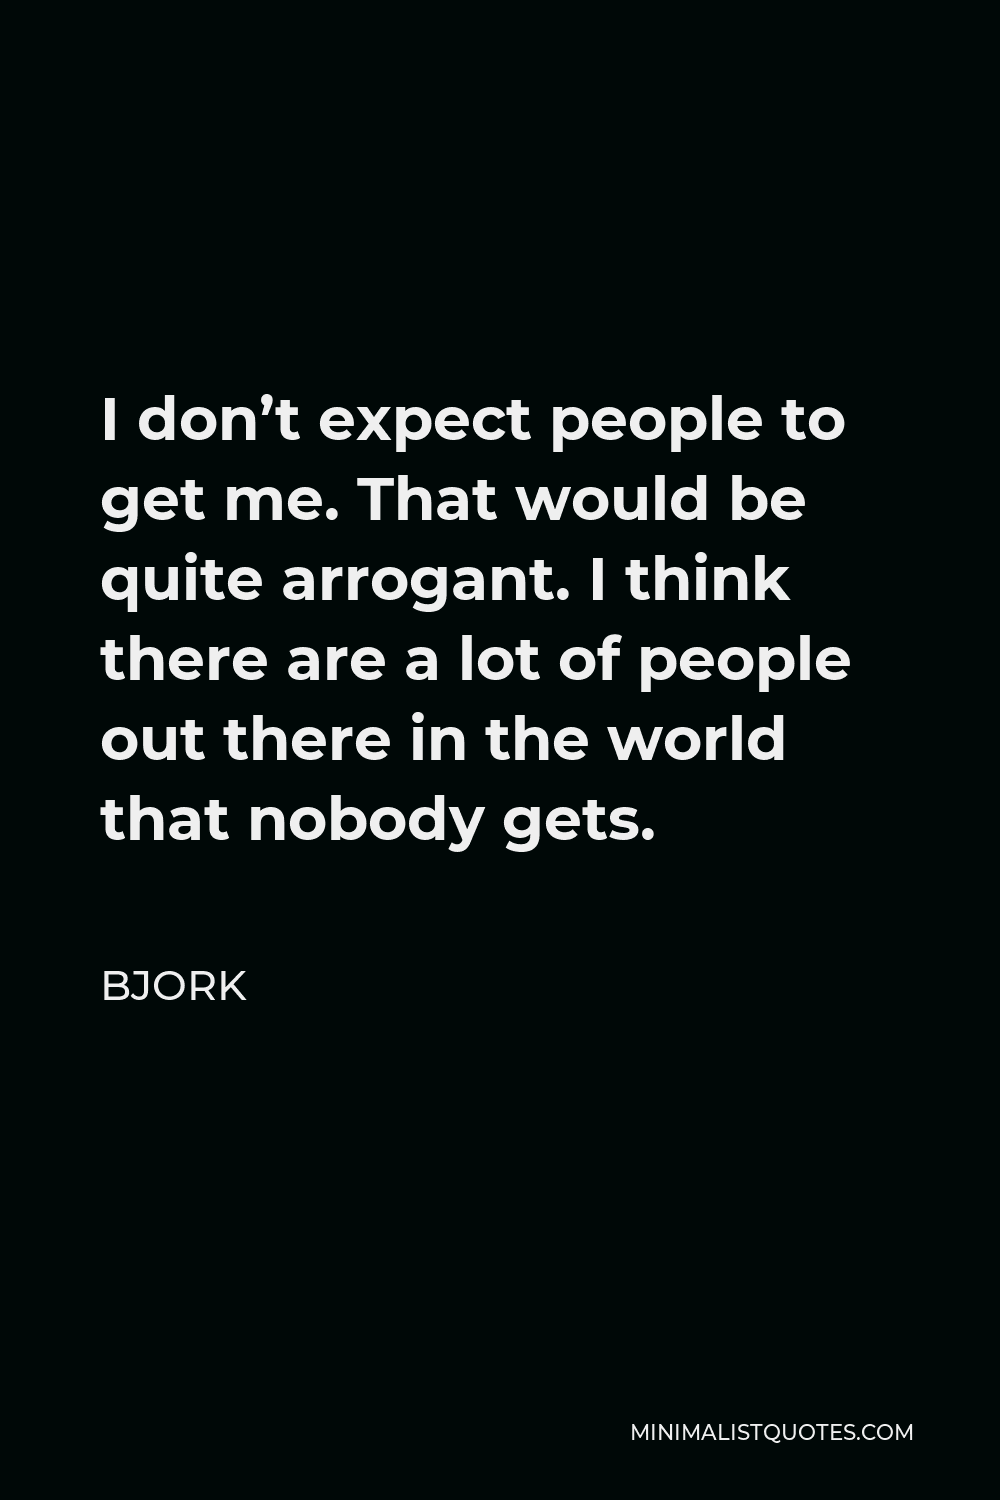 Bjork Quote - I don’t expect people to get me. That would be quite arrogant. I think there are a lot of people out there in the world that nobody gets.